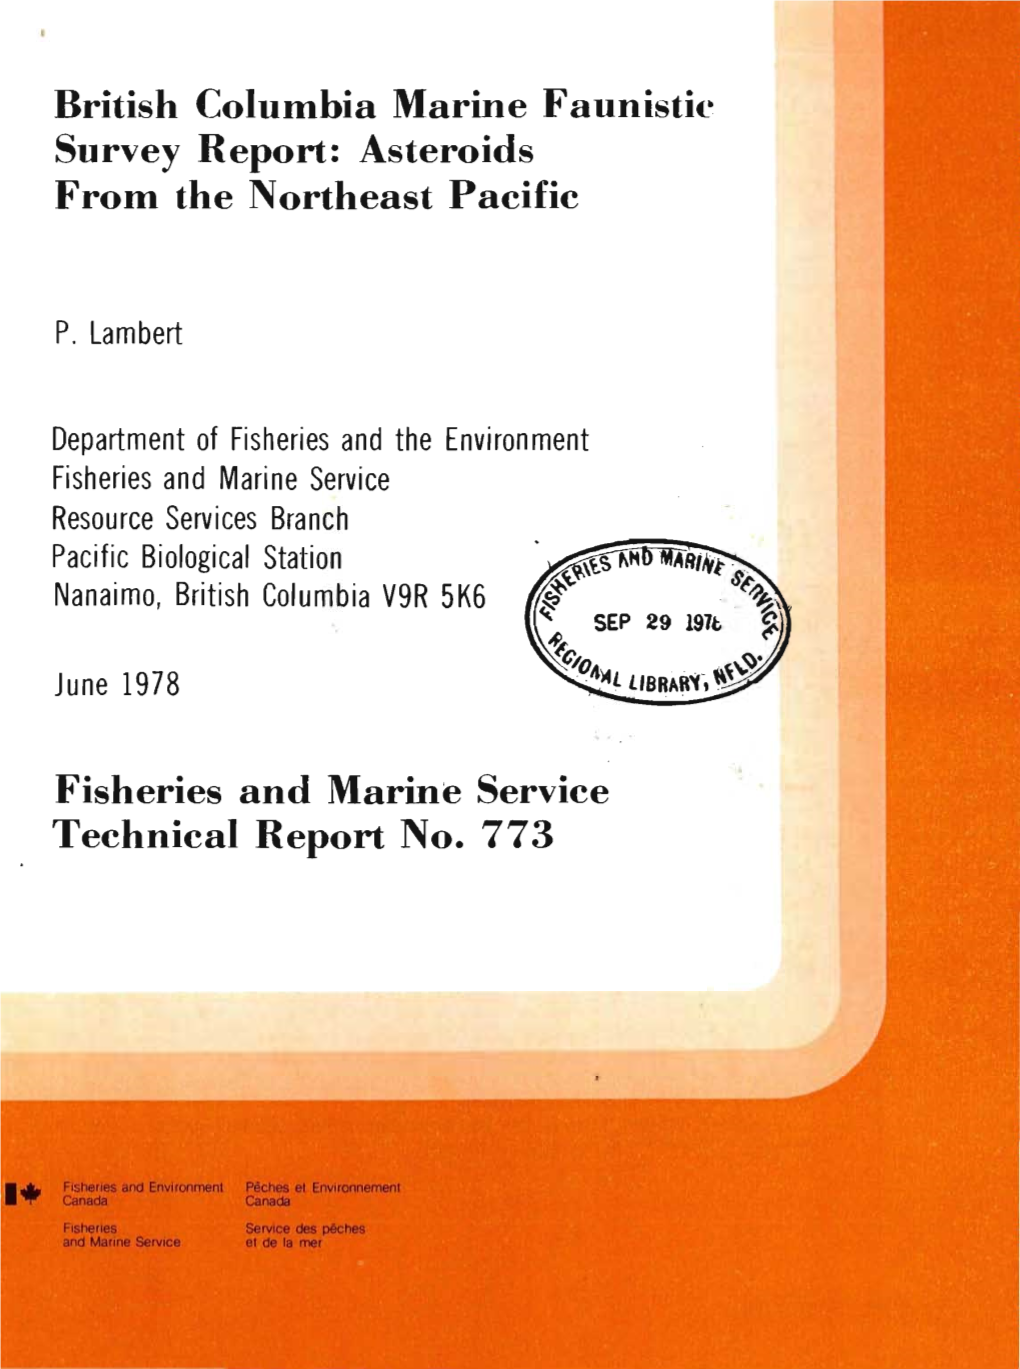 British Columbia Marine Faunistic. Survey Report: Asteroids from the Northeast Pacific